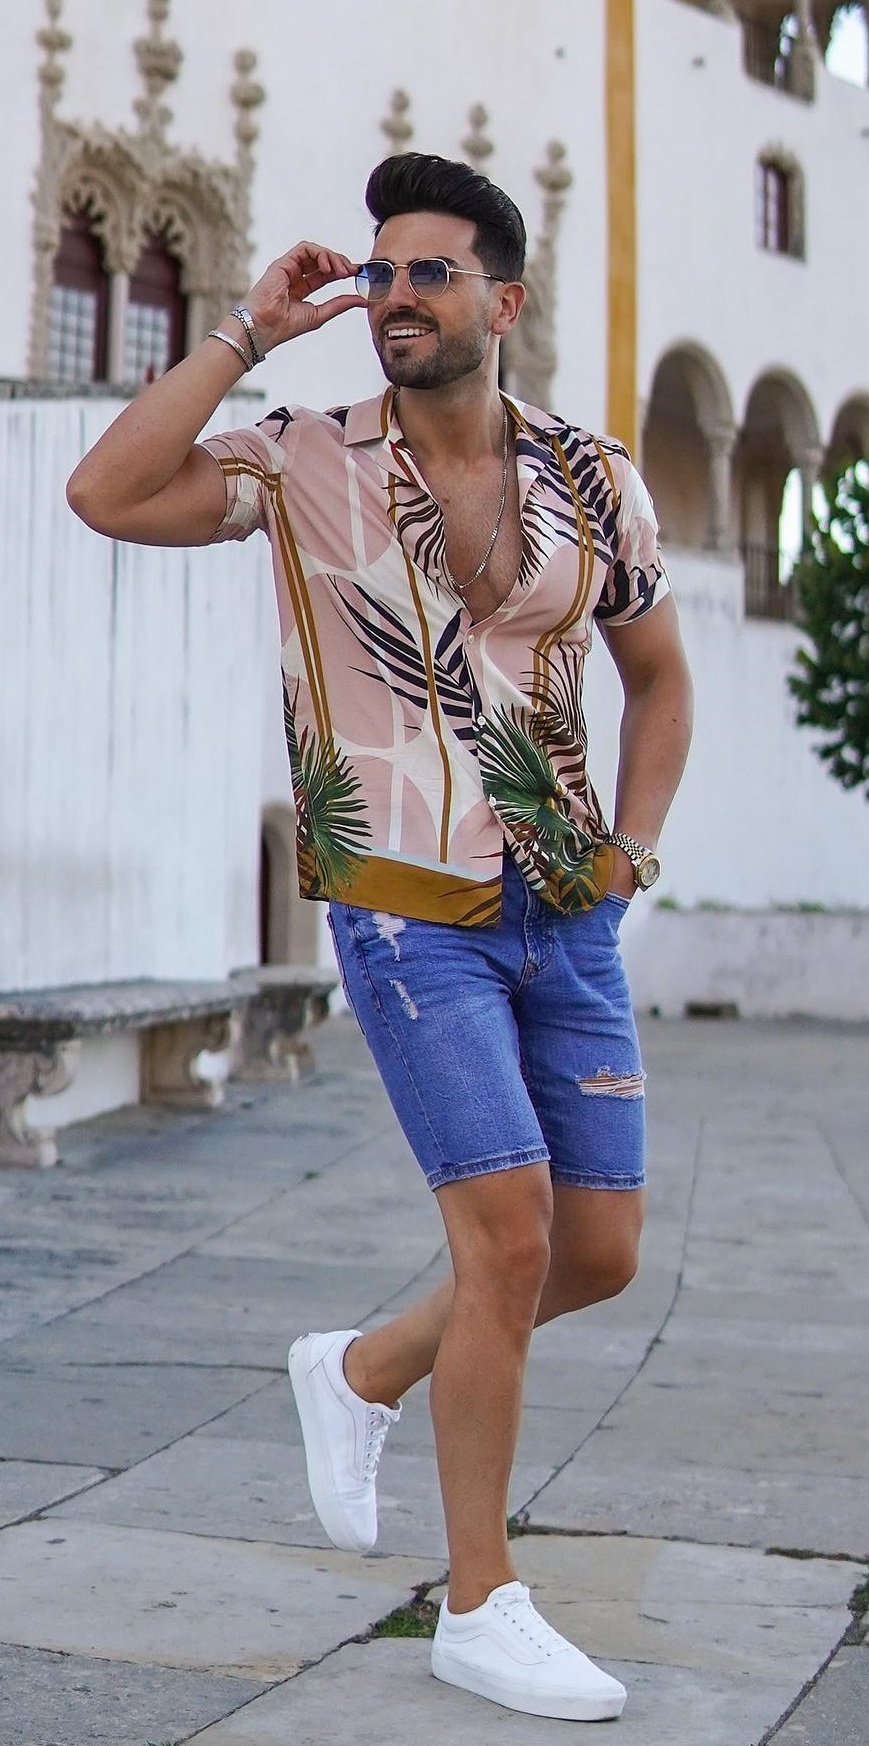 Printed Shirts _ Ripped Shorts weekend getway outfit inspos for men